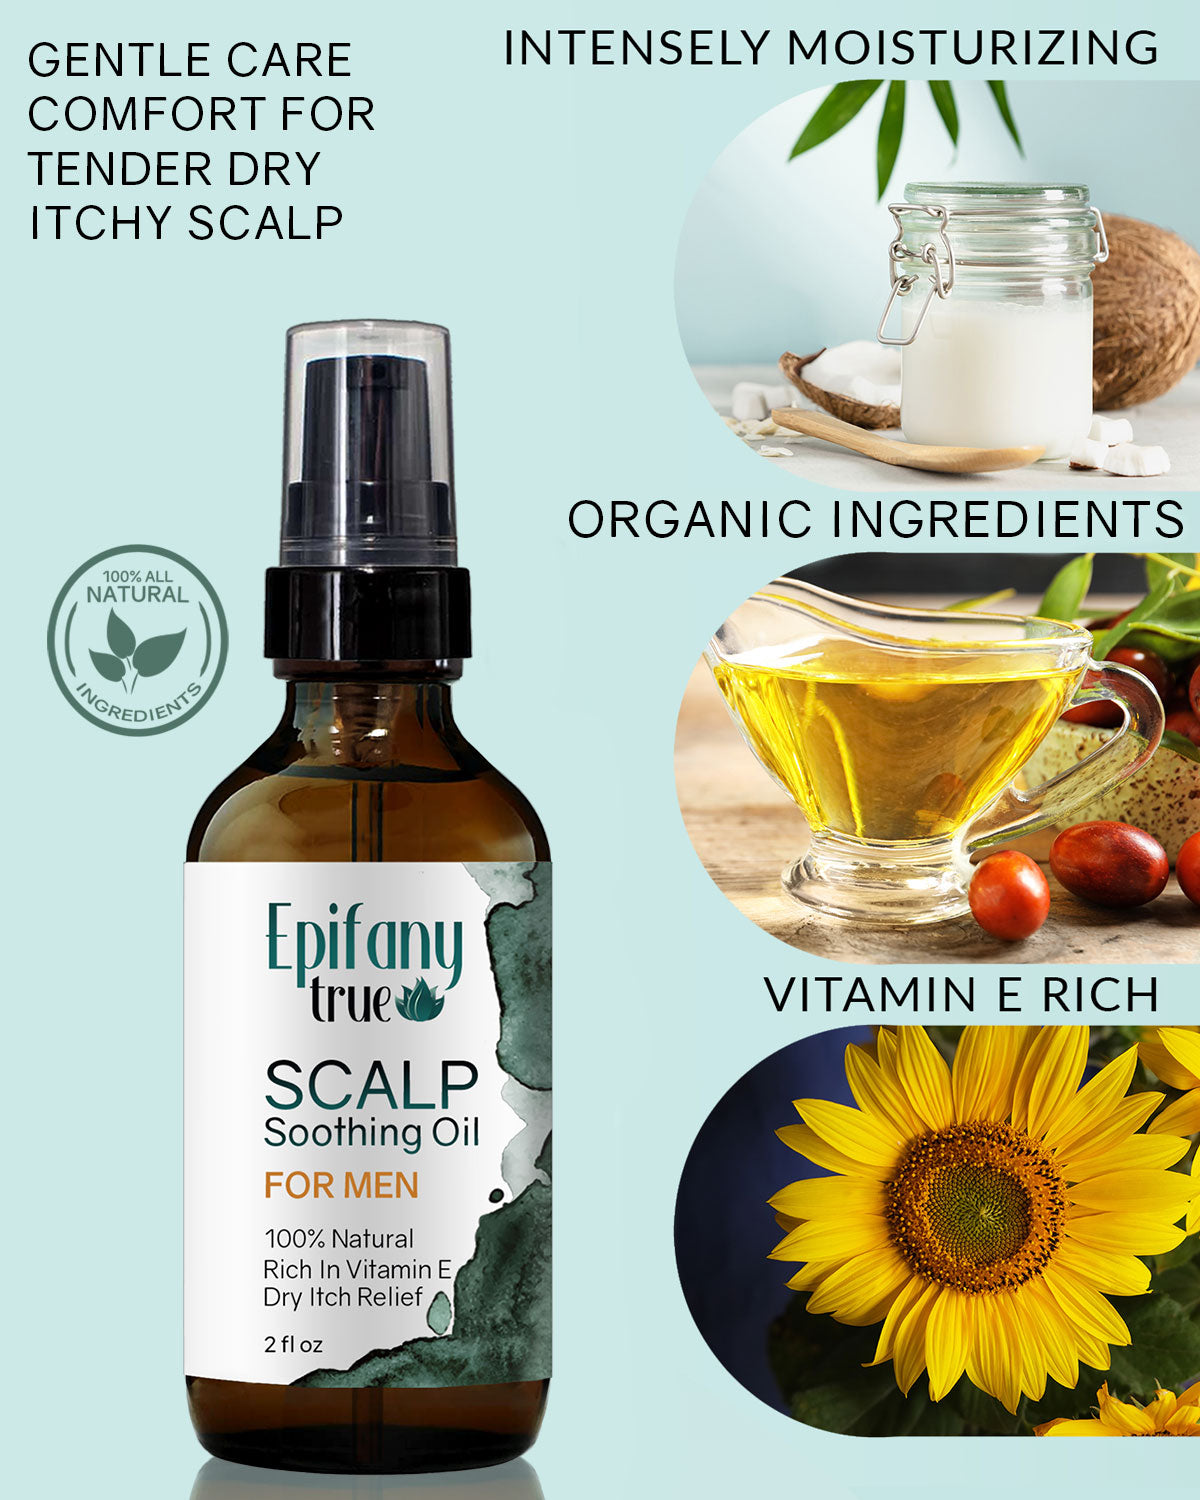 Epifany True 100% Natural Scalp Soothing Oil For Men 2oz for tender itchy scalp infographic